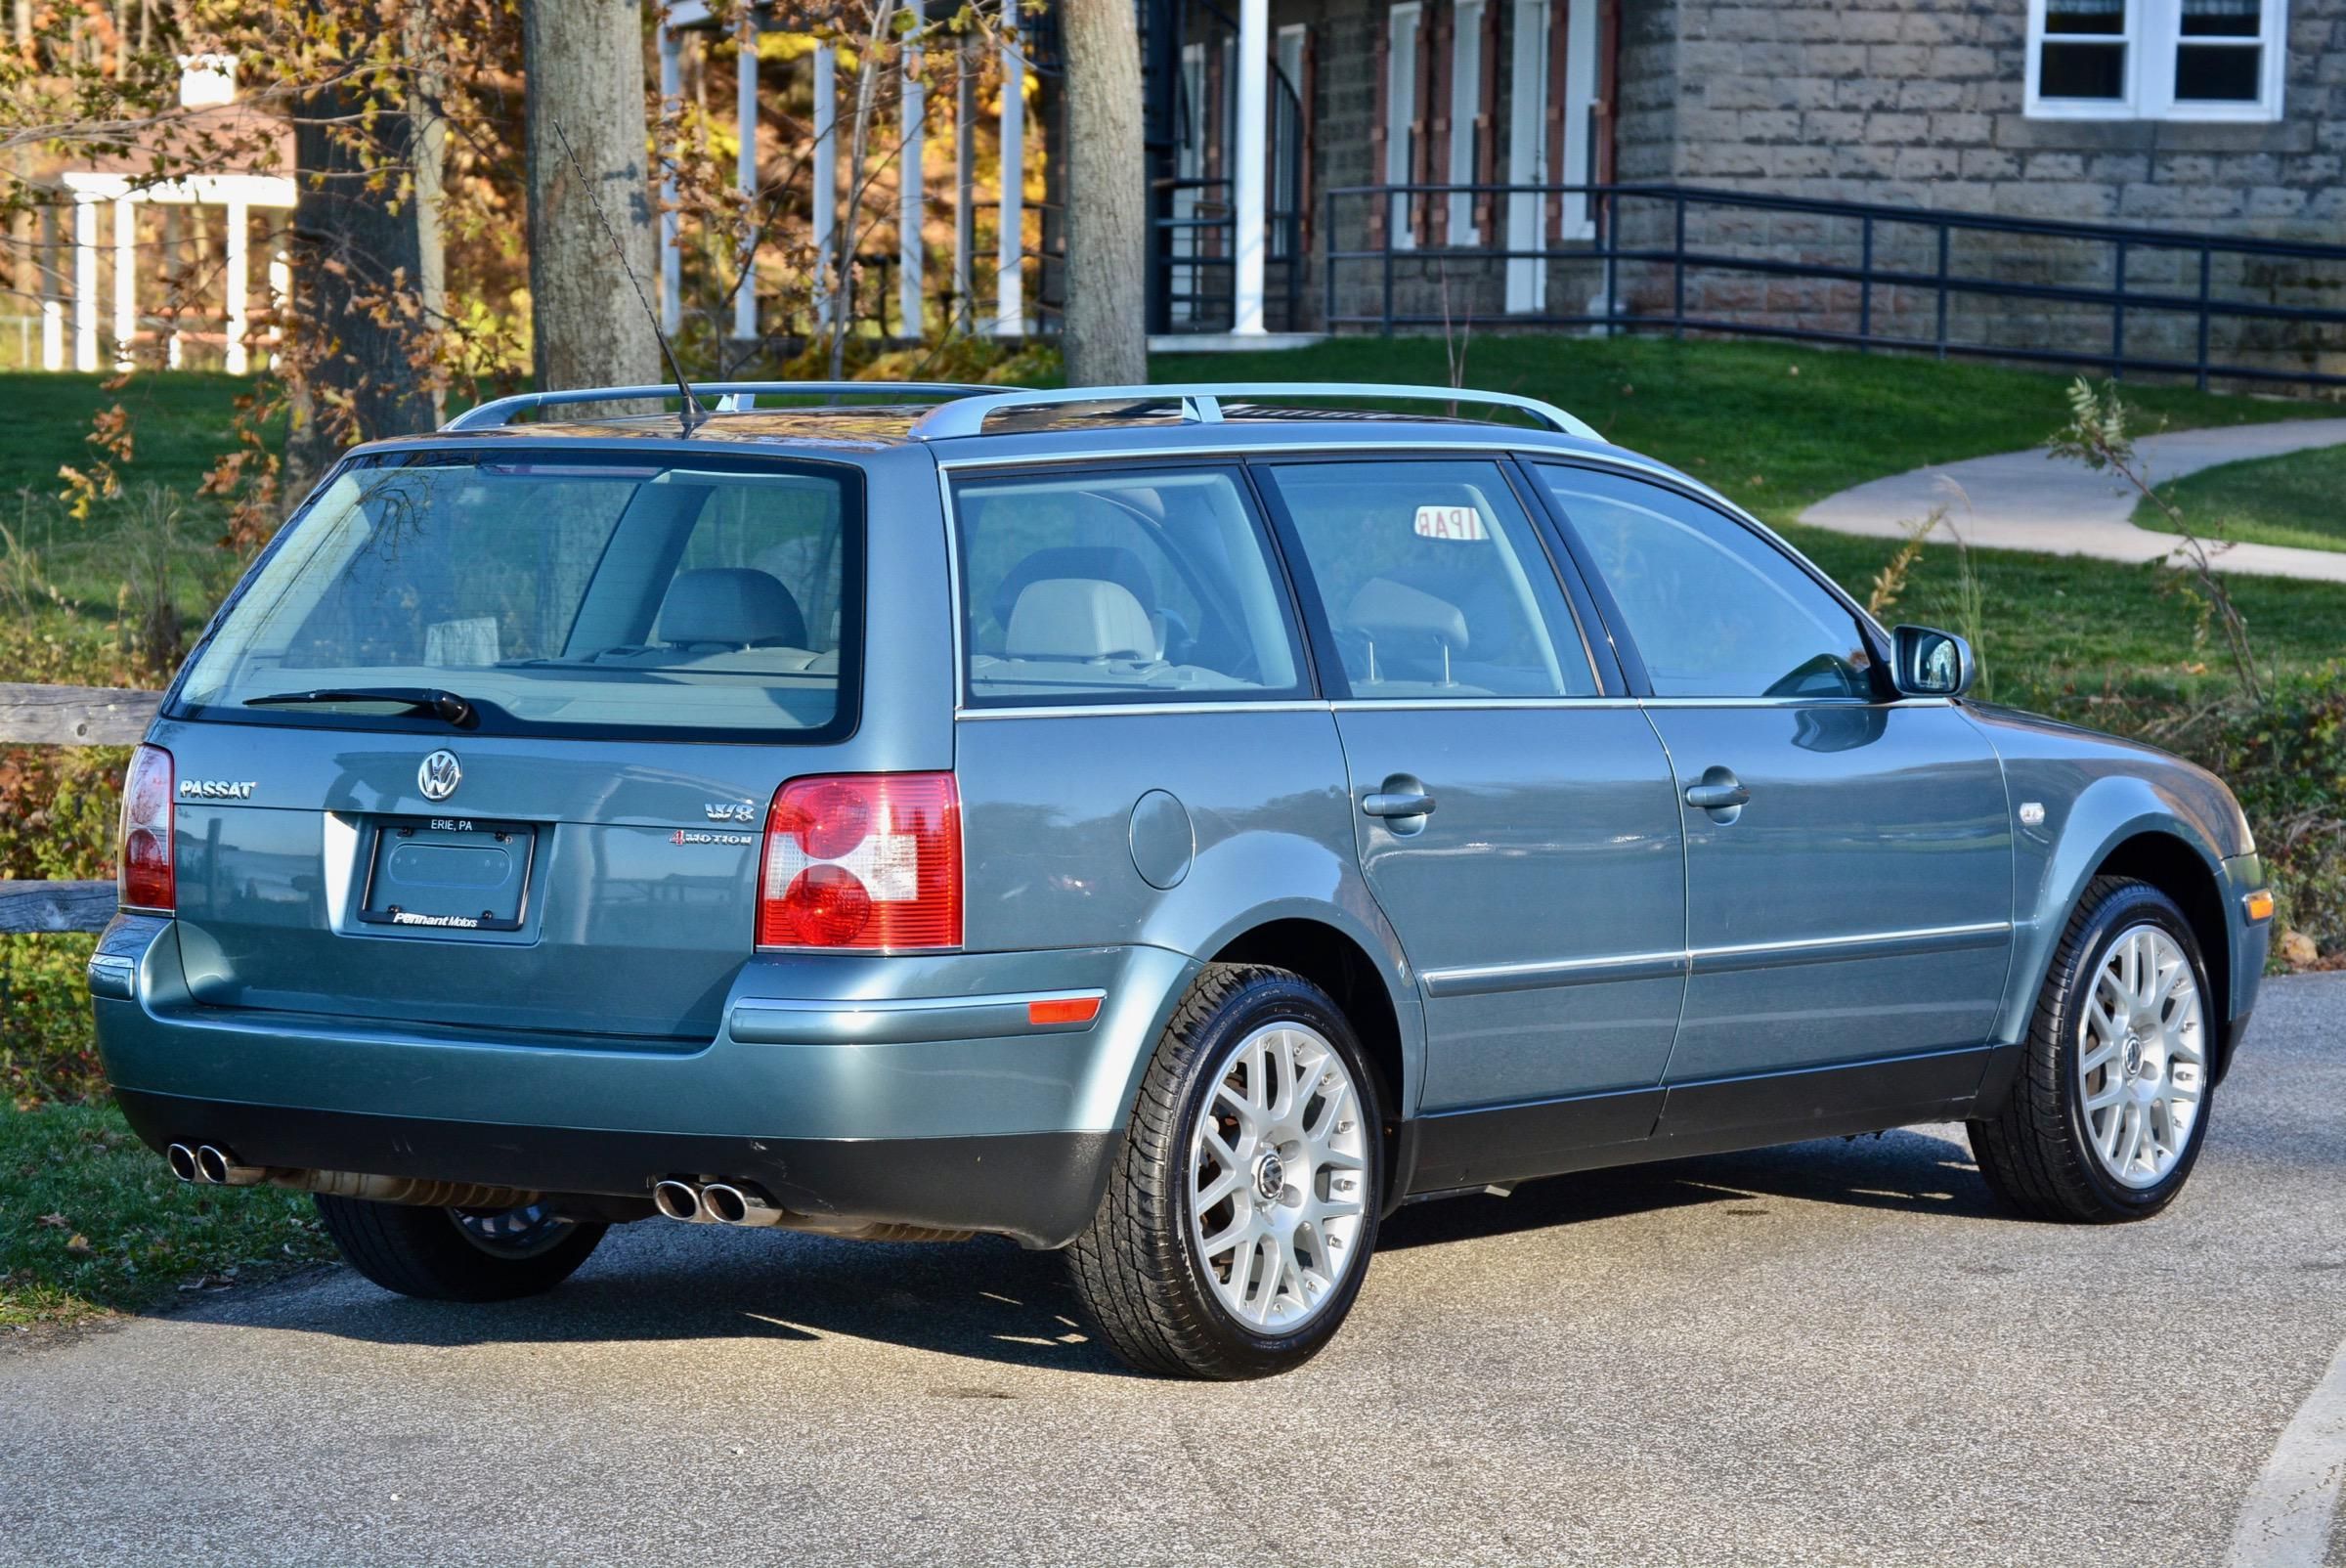 The Passat W8 was VW's attempt to penetrate the upmarket.